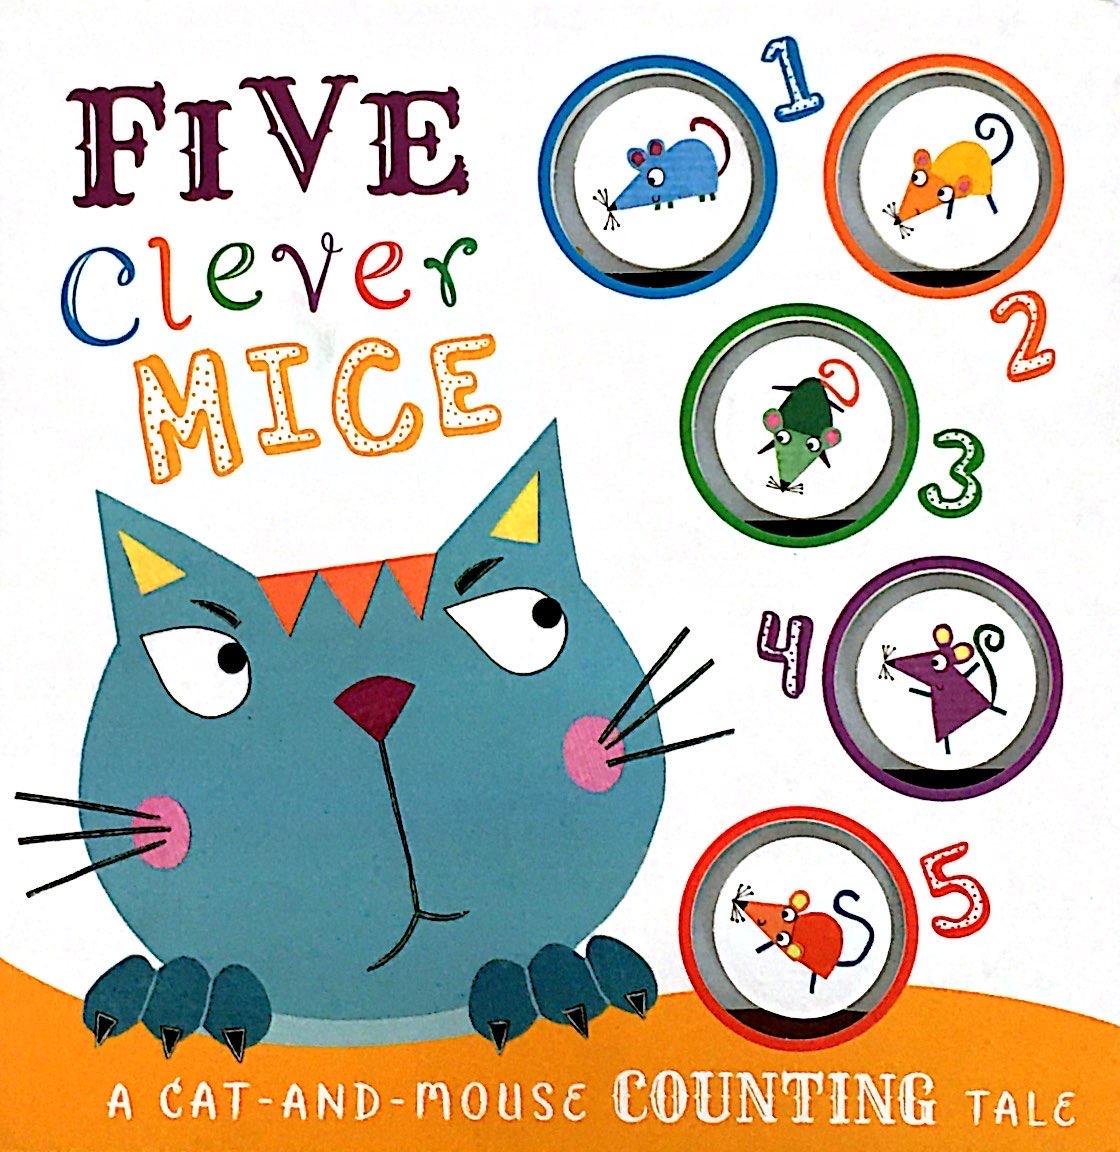 Five Clever Mice